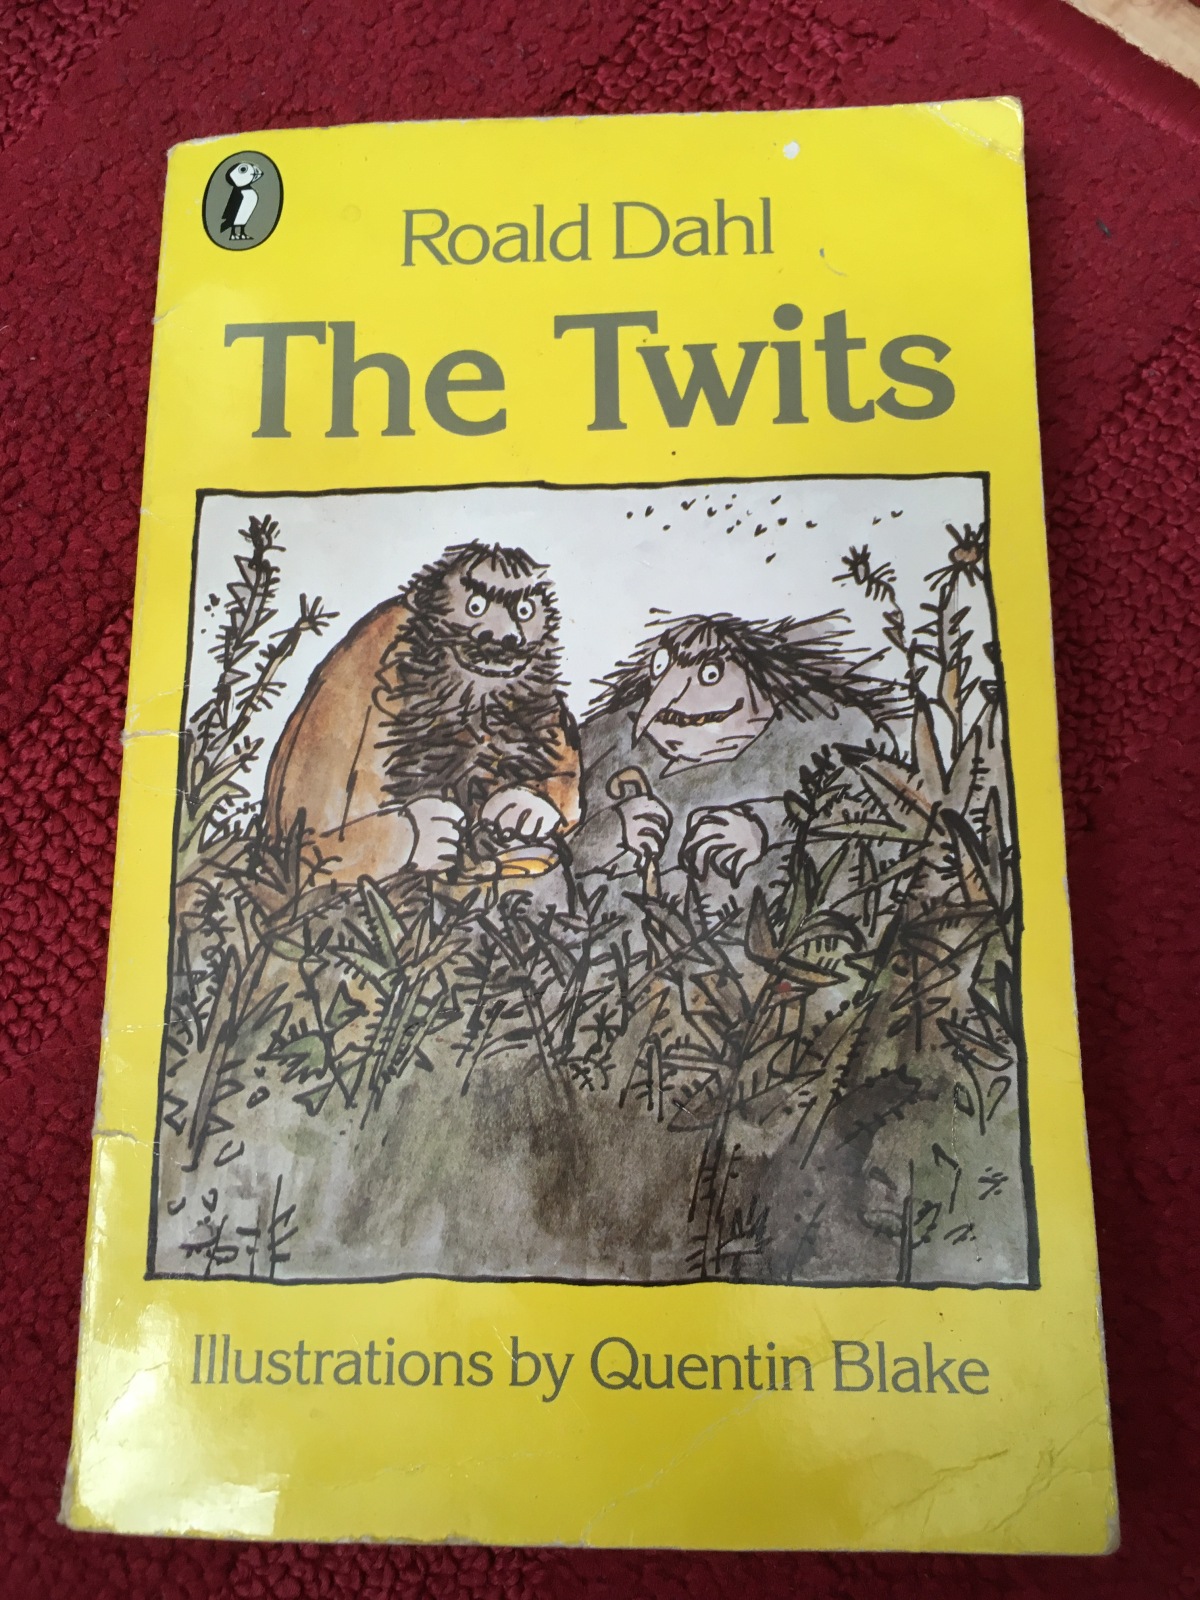 The Twits by Roald Dahl